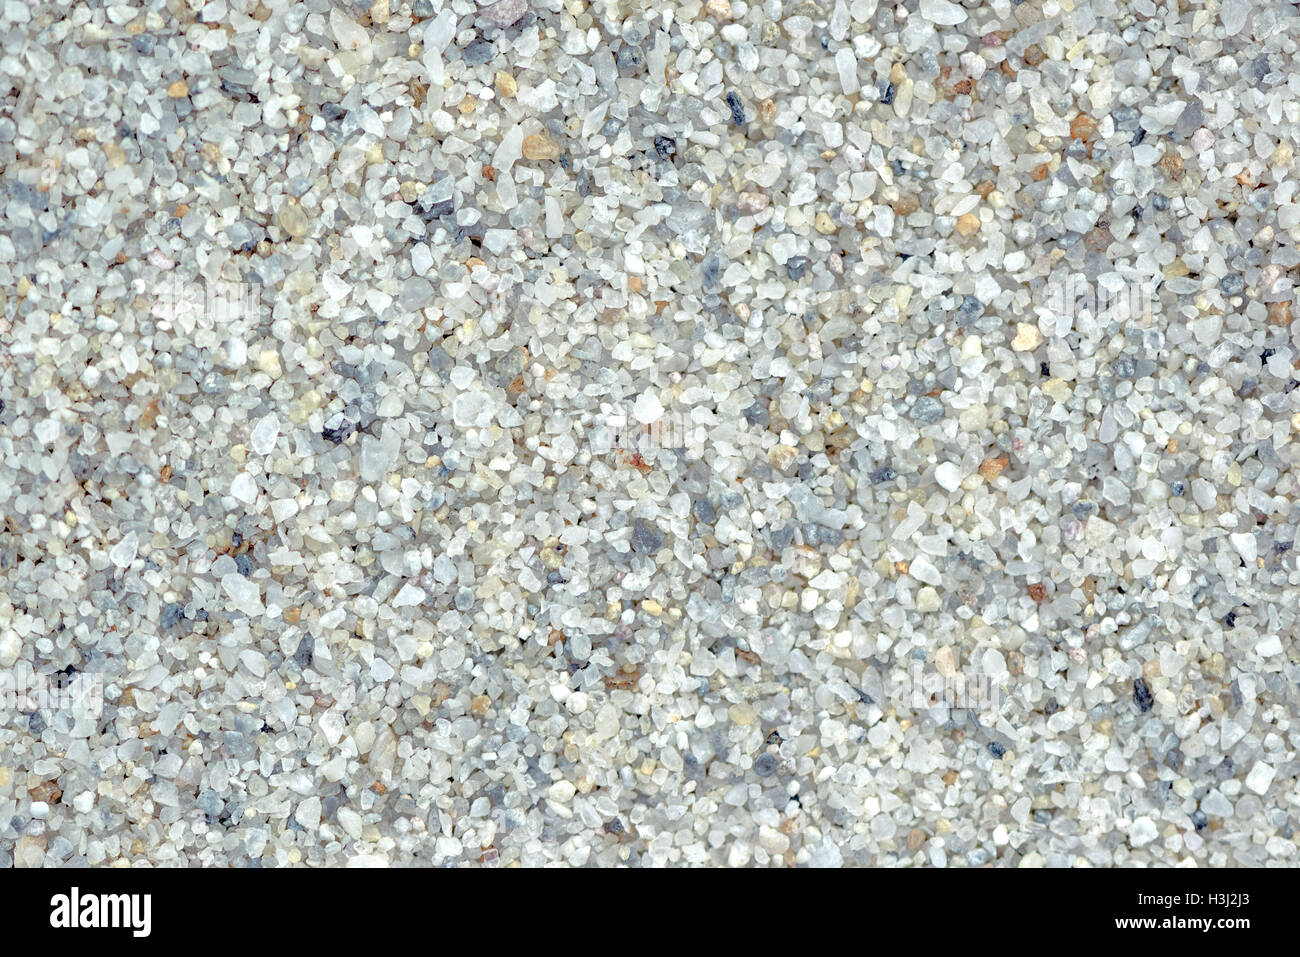 Quartz sand abstract texture as background, macro view of grainy surface Stock Photo